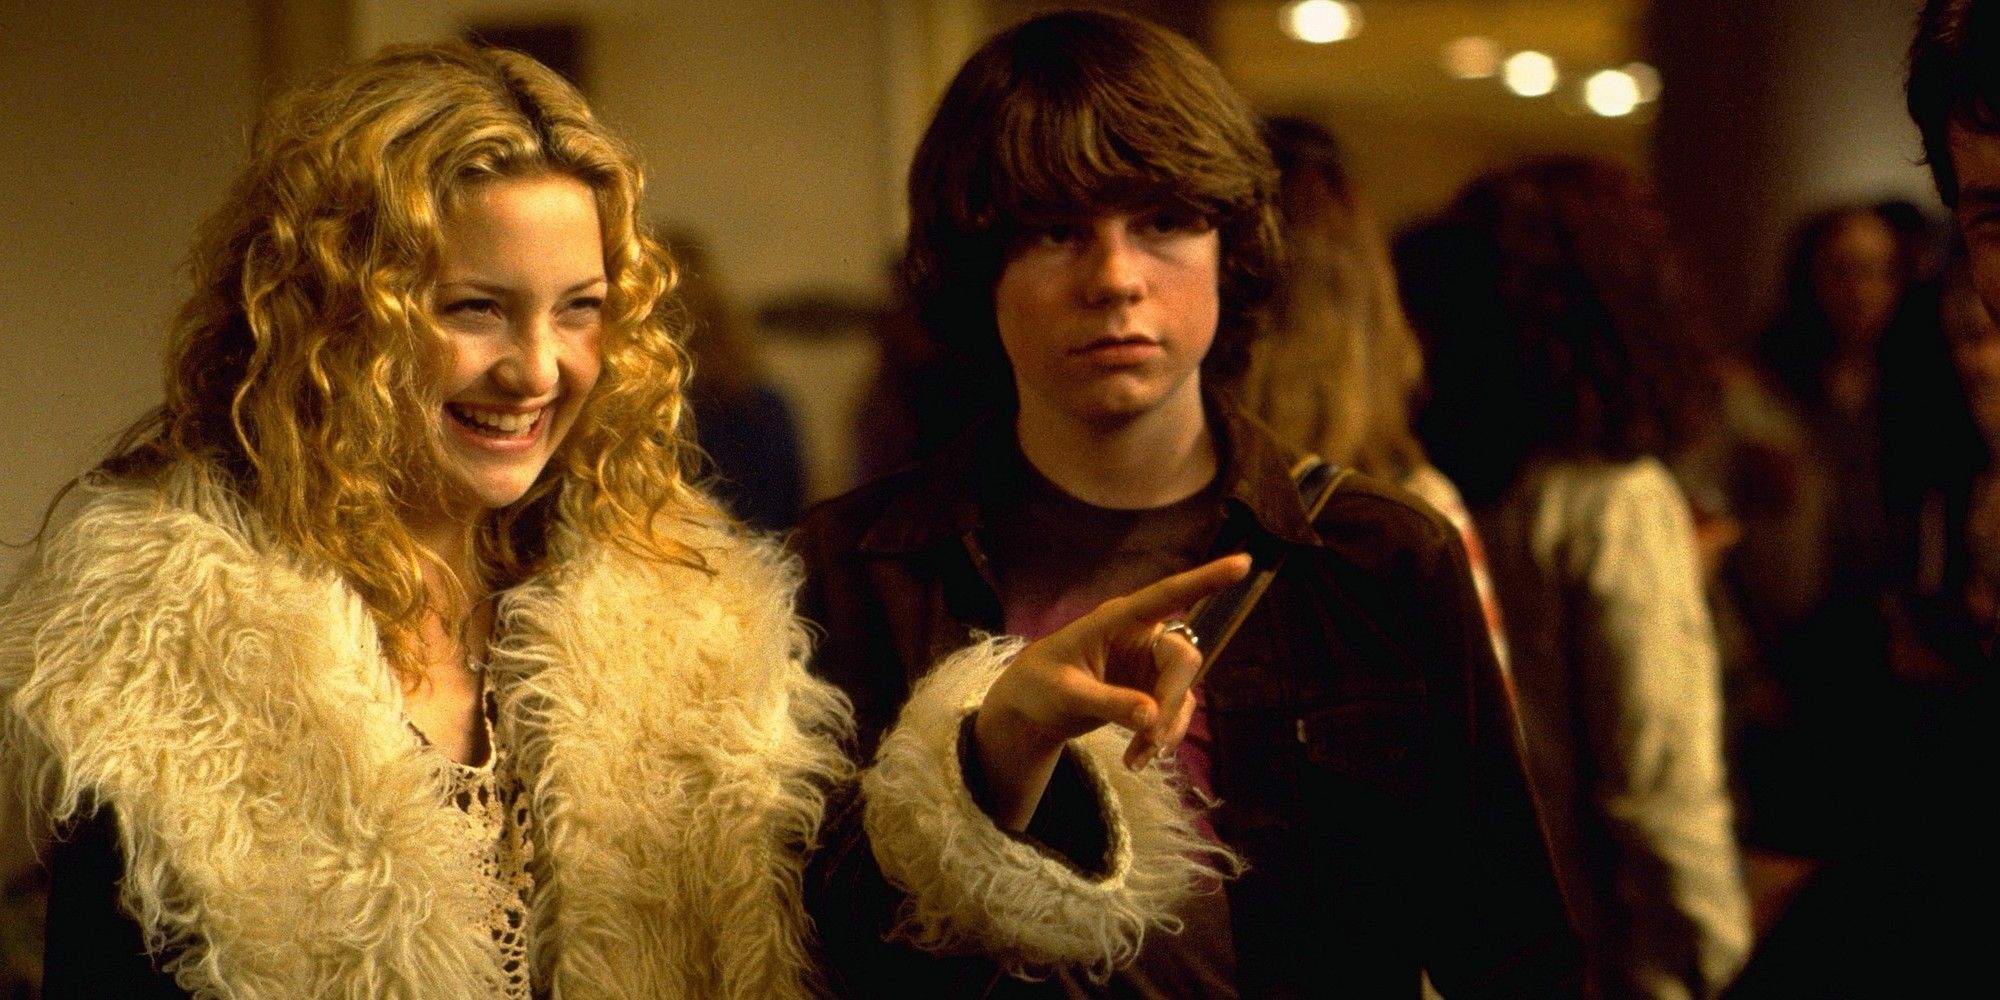 Kate Hudson's Penny Lane points and smiles as Patrick Fugit's William looks stoic in Almost Famous